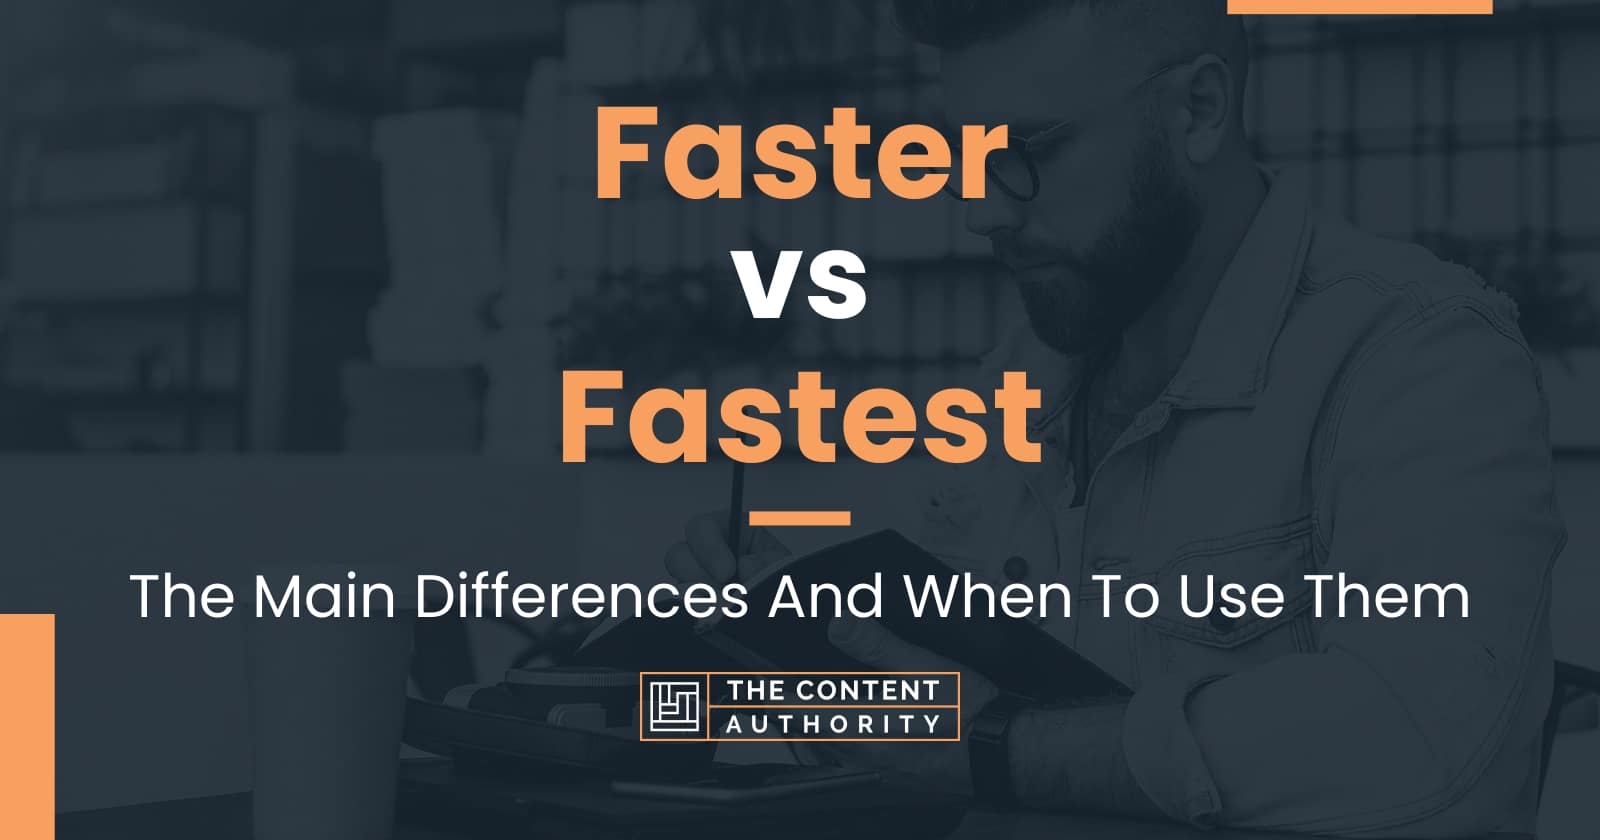 What is different faster or fastest?